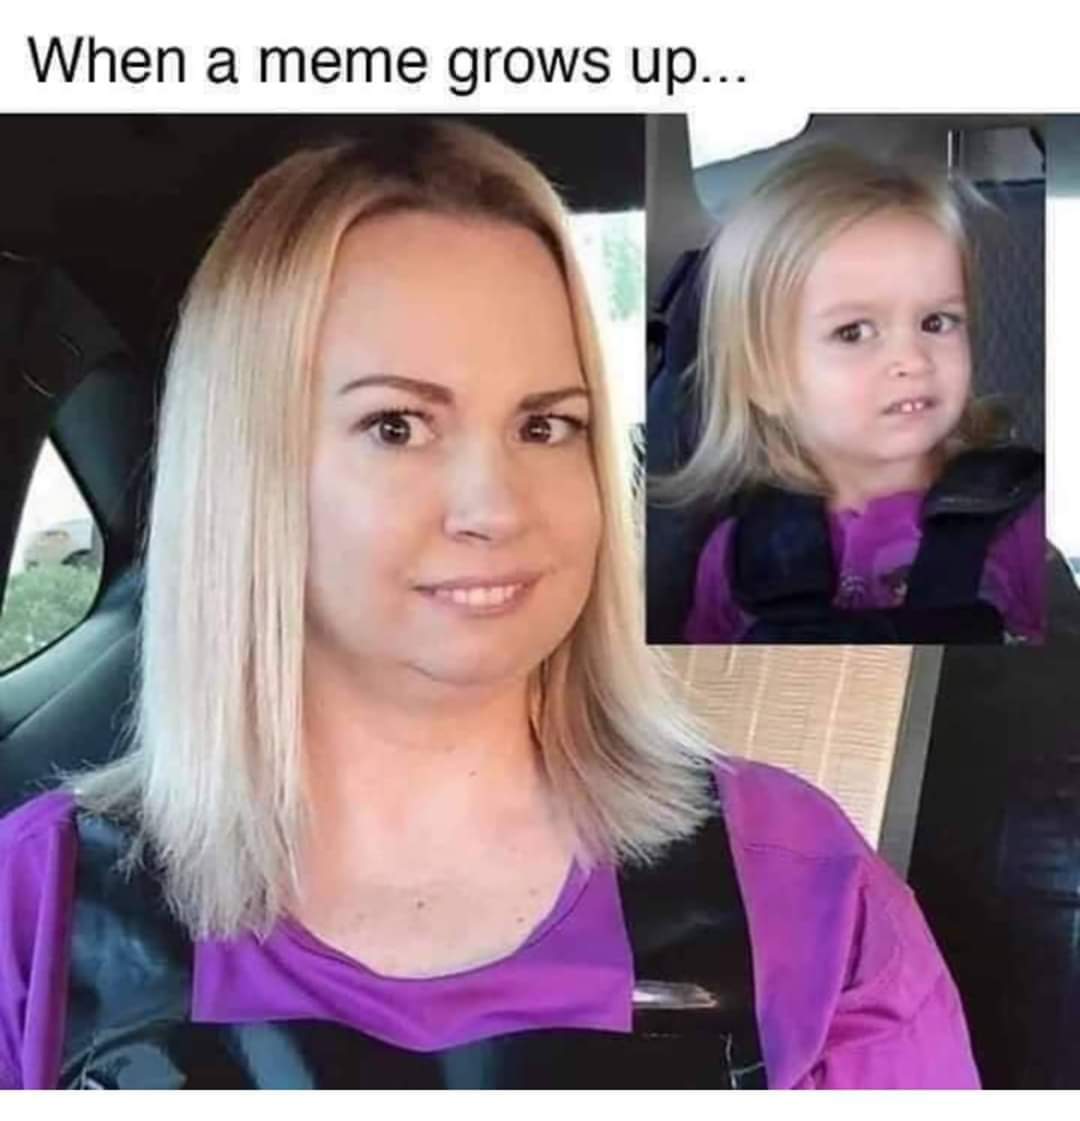 unimpressed chloe mom - When a meme grows up...